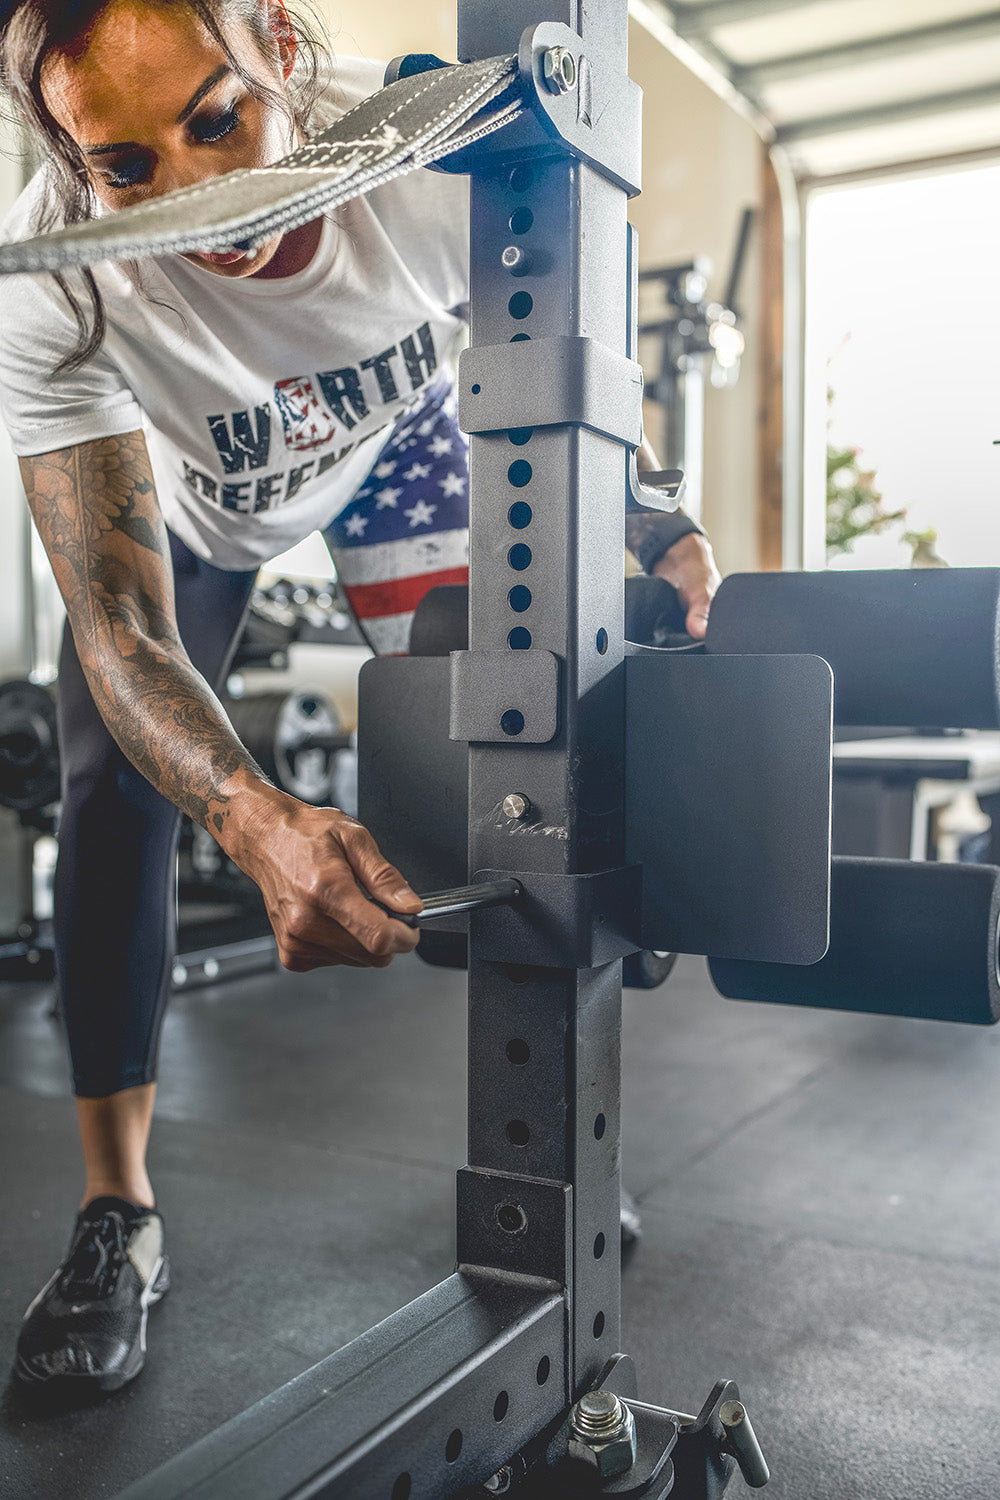 This Rack Mounted Glute Ham Developer is less bulky and lower priced than conventional GHDs. Perfect for glute workouts, ab workouts, and hamstring workouts. This image presents the Rack Mounted Glute Ham Developer being attached on a workout rack in a home gym.